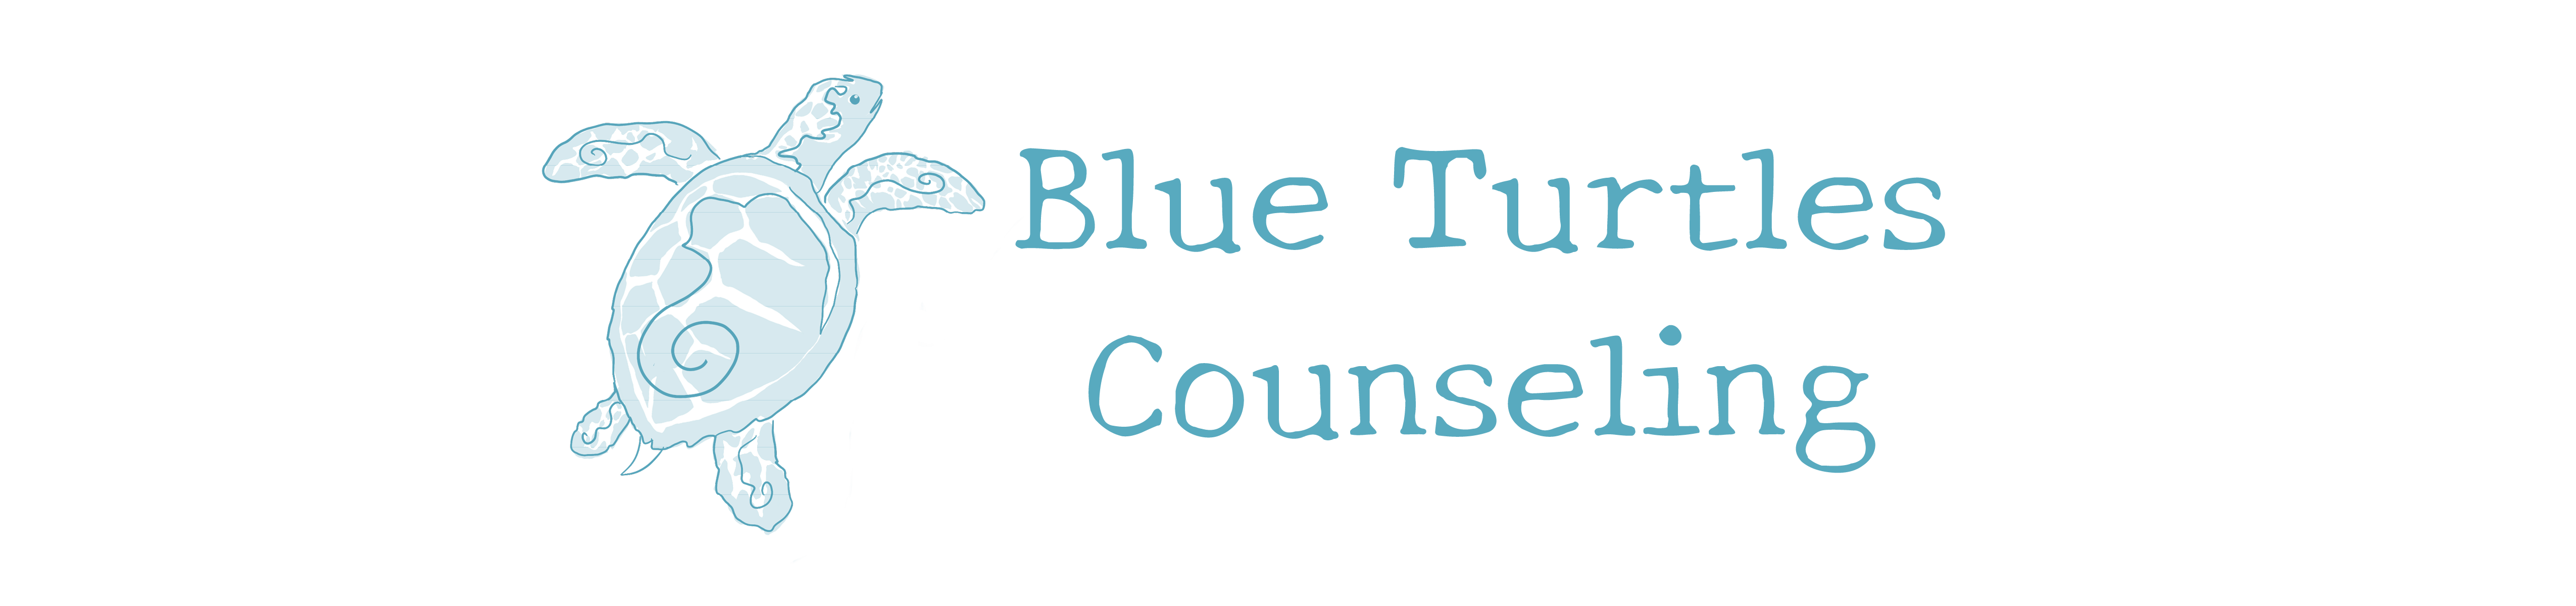 Blue Turtles Counseling and Consulting